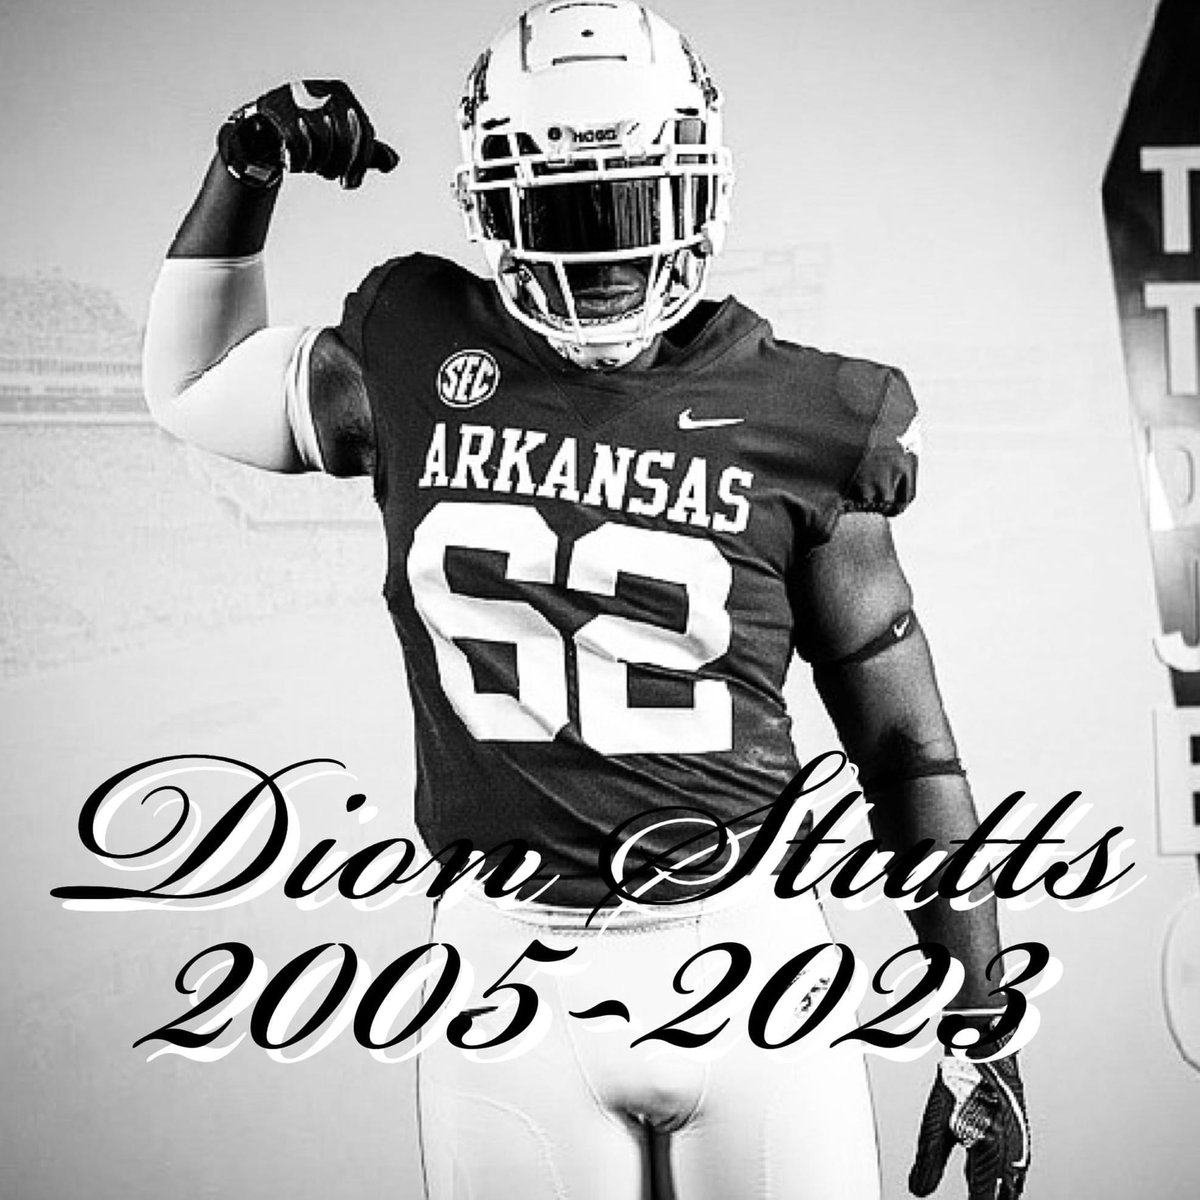 🙏🏾 Rest on young man. Praying for the family. God Bless! #WPS